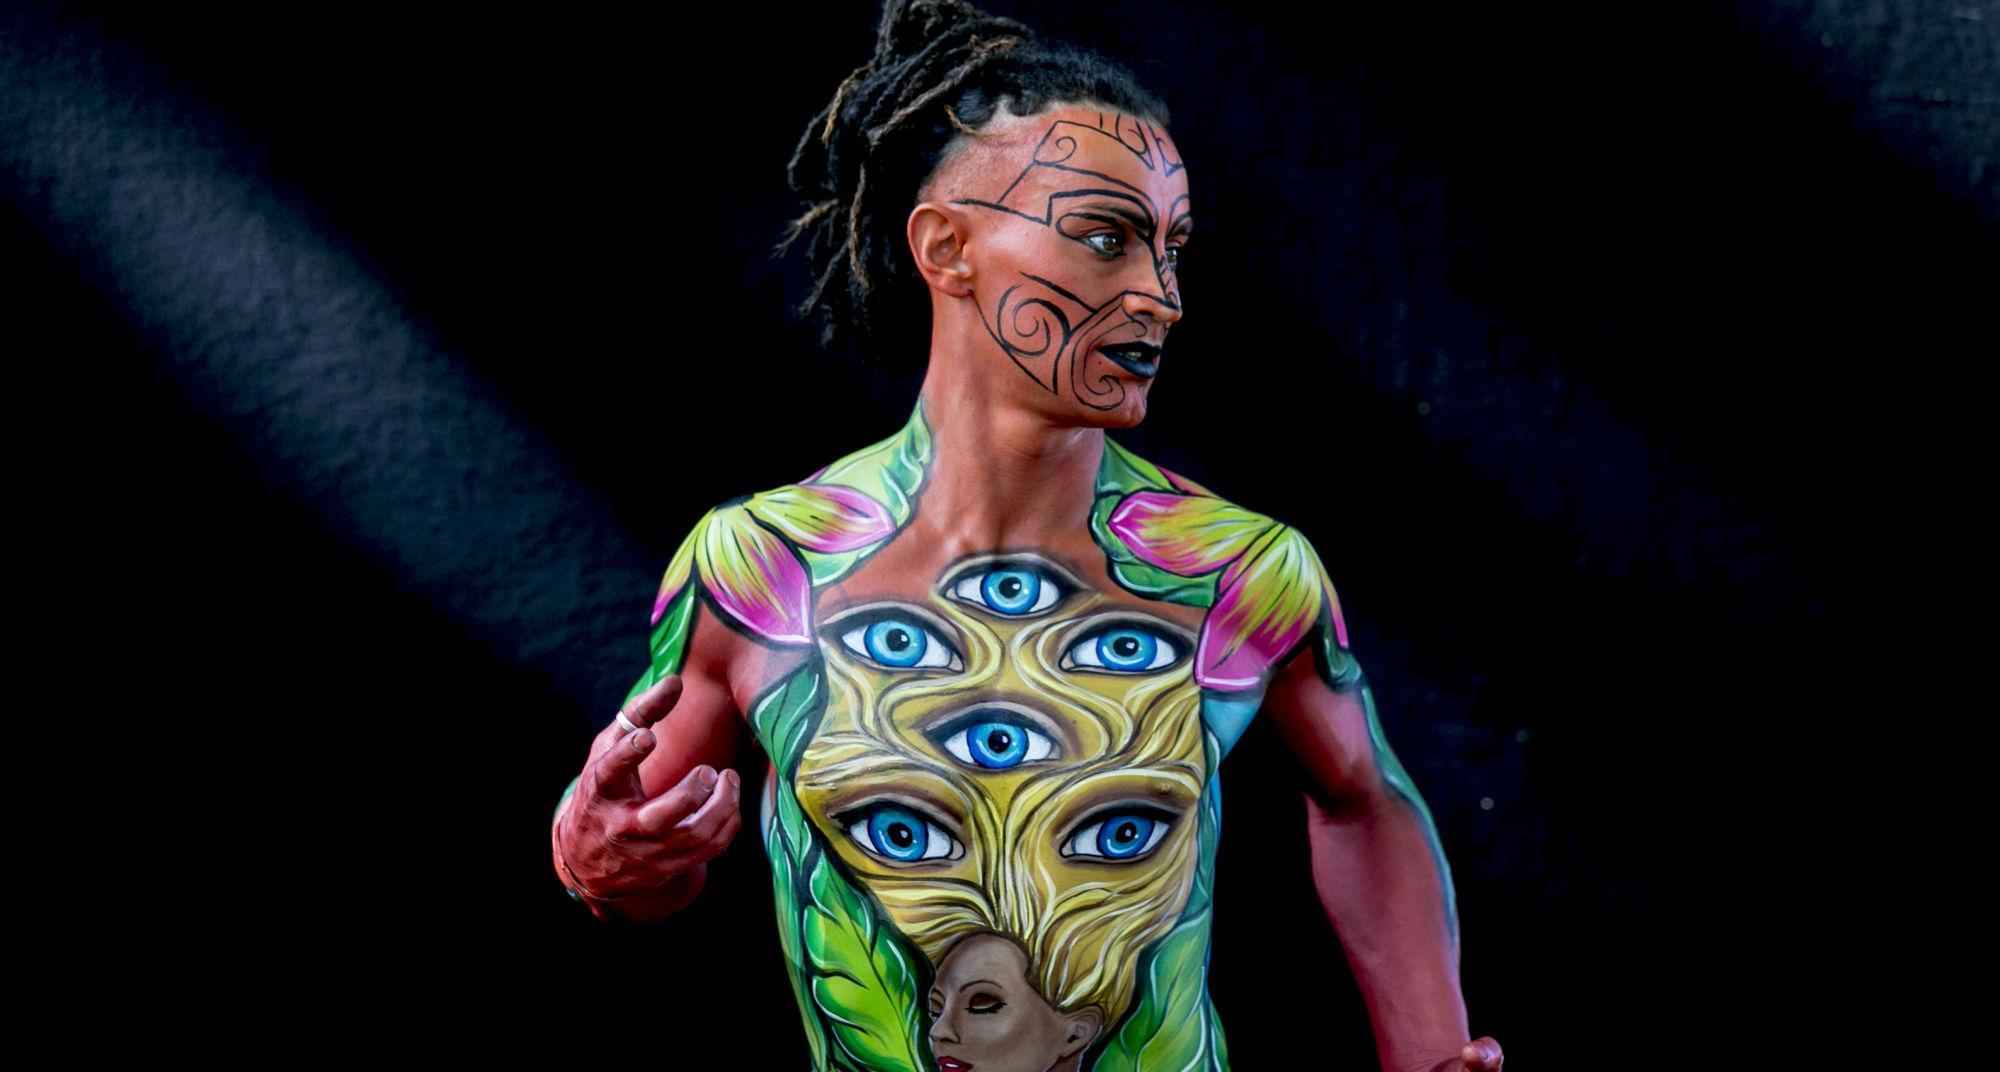 These are the best images from the World Bodypainting Festival.